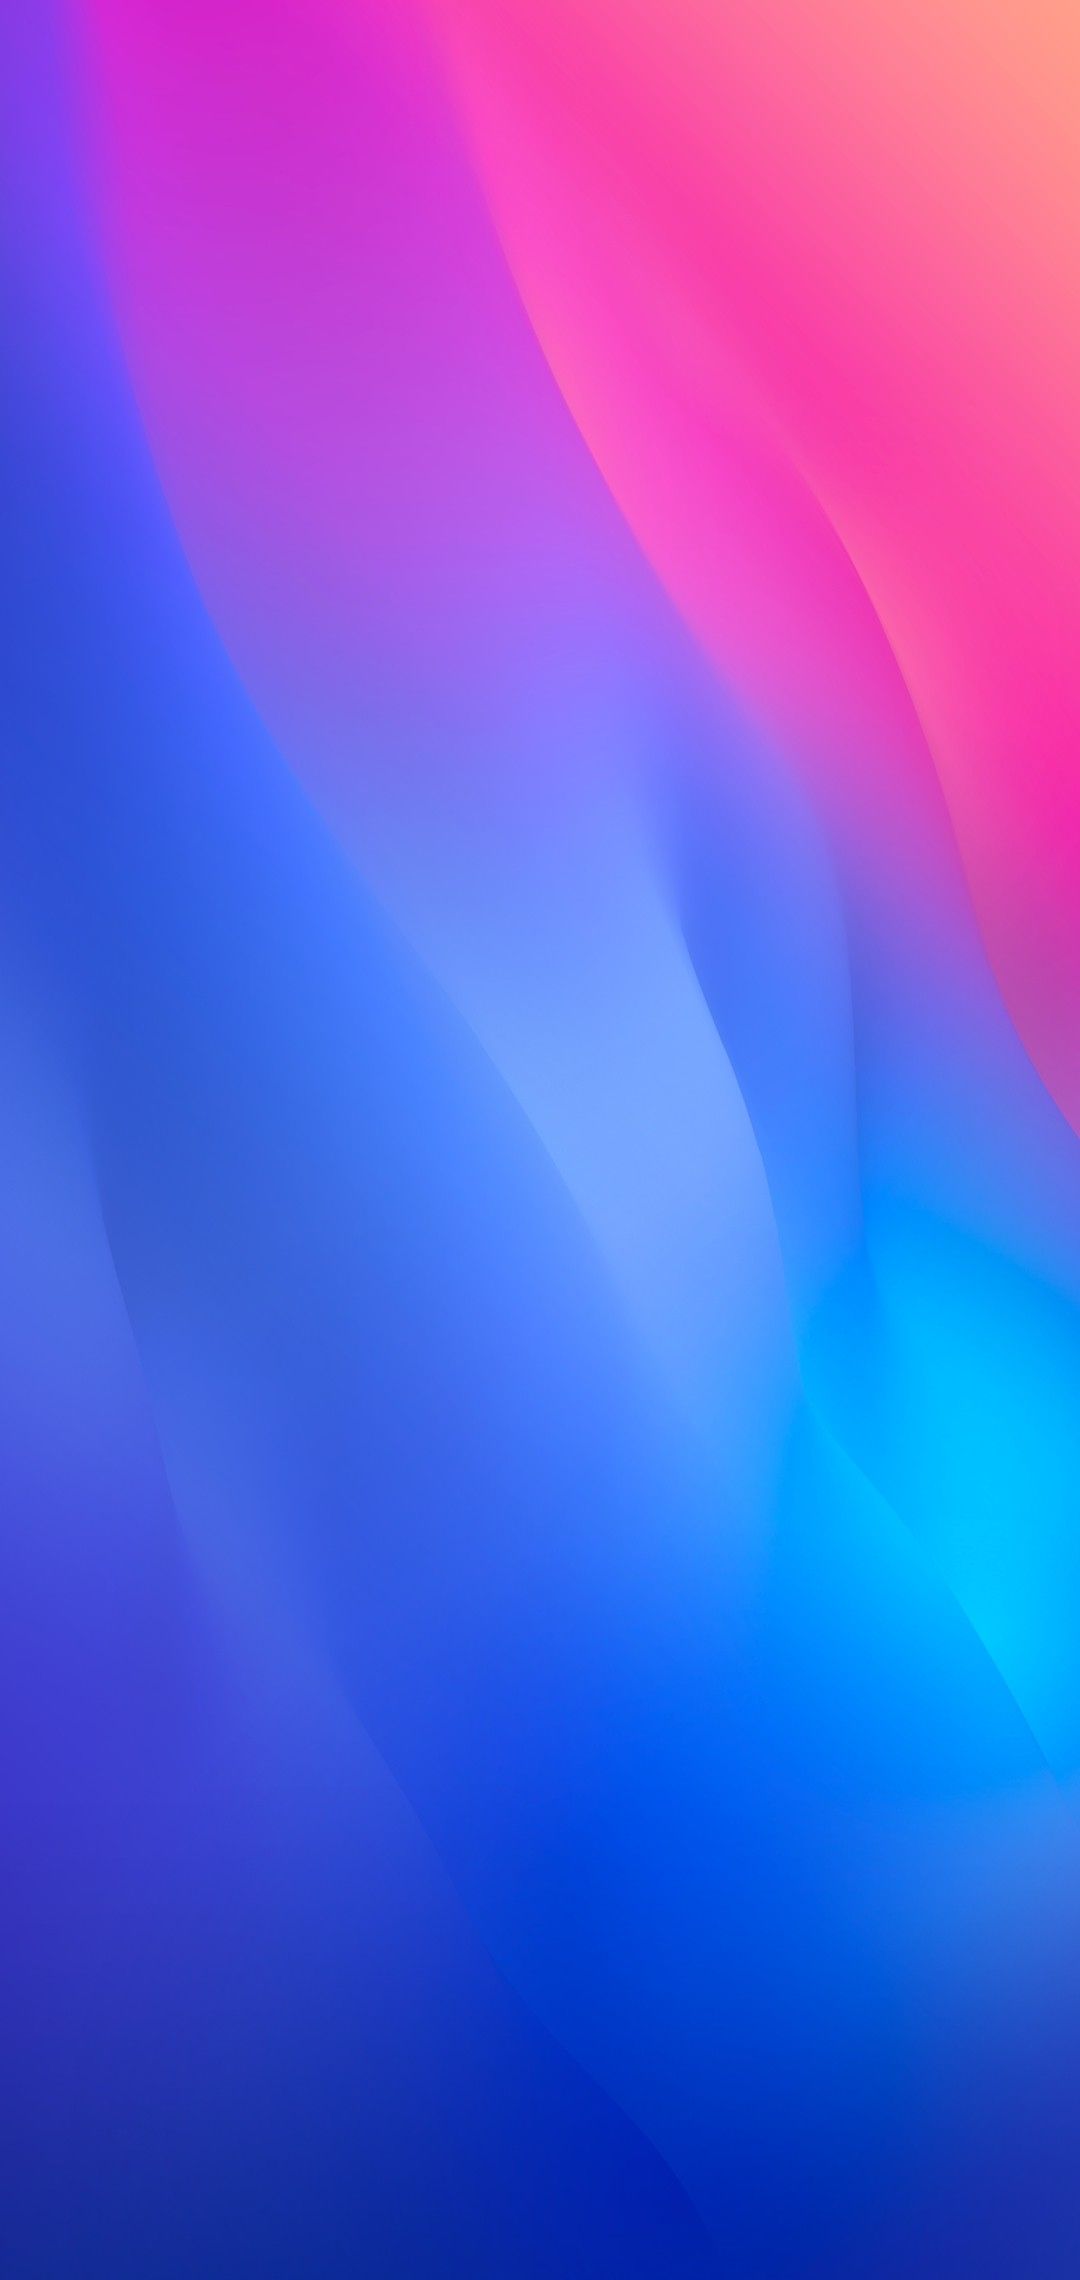 iOS iPhone X, blue, pink, clean, simple, abstract, apple, wallpaper, iphone clean, beauty, colour. Pink wallpaper iphone, iPhone wallpaper, Apple wallpaper